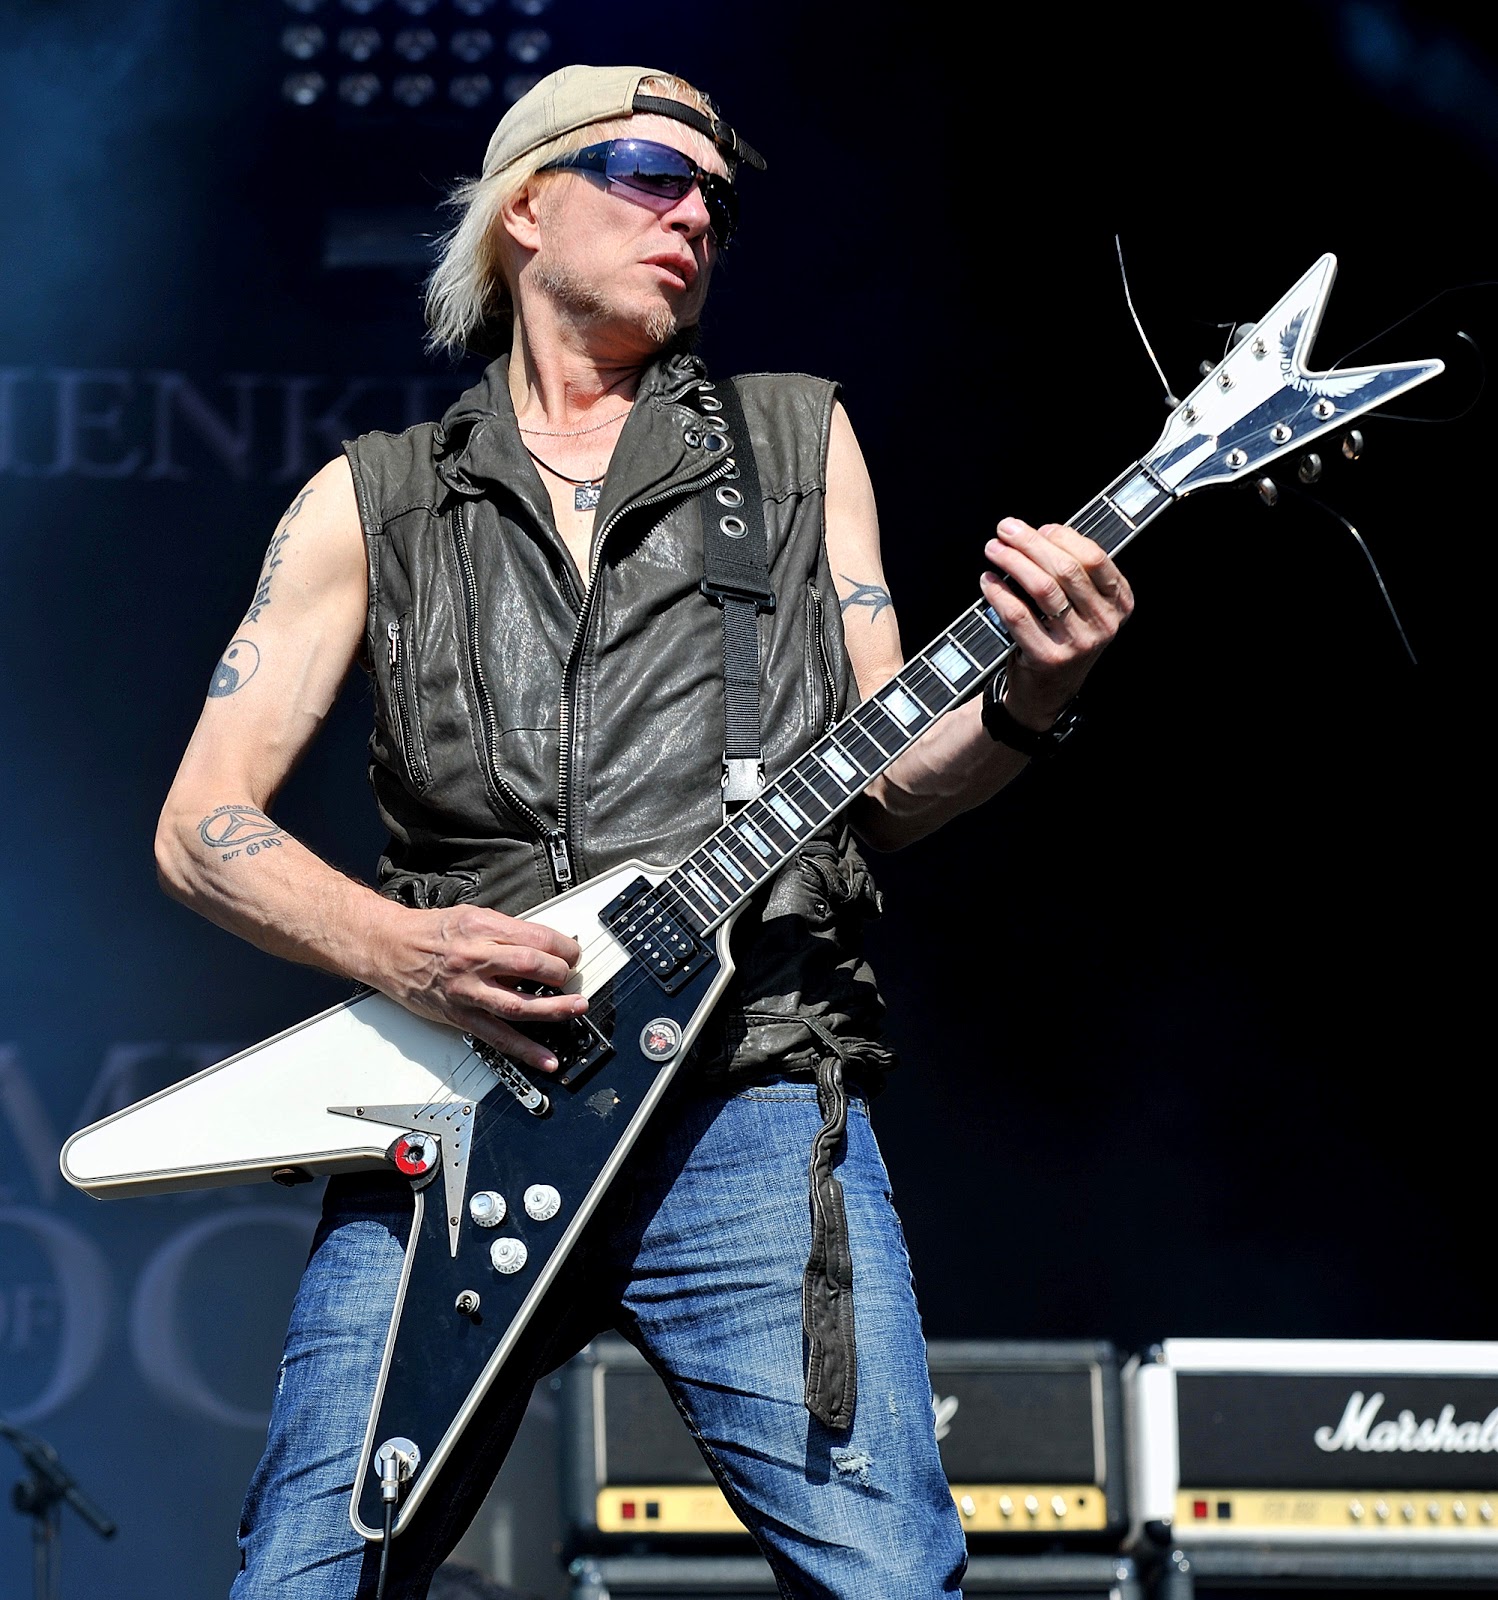 ENTER THE TEMPLE OF ROCK WITH MICHAEL SCHENKER (SCORPIONS, UFO)